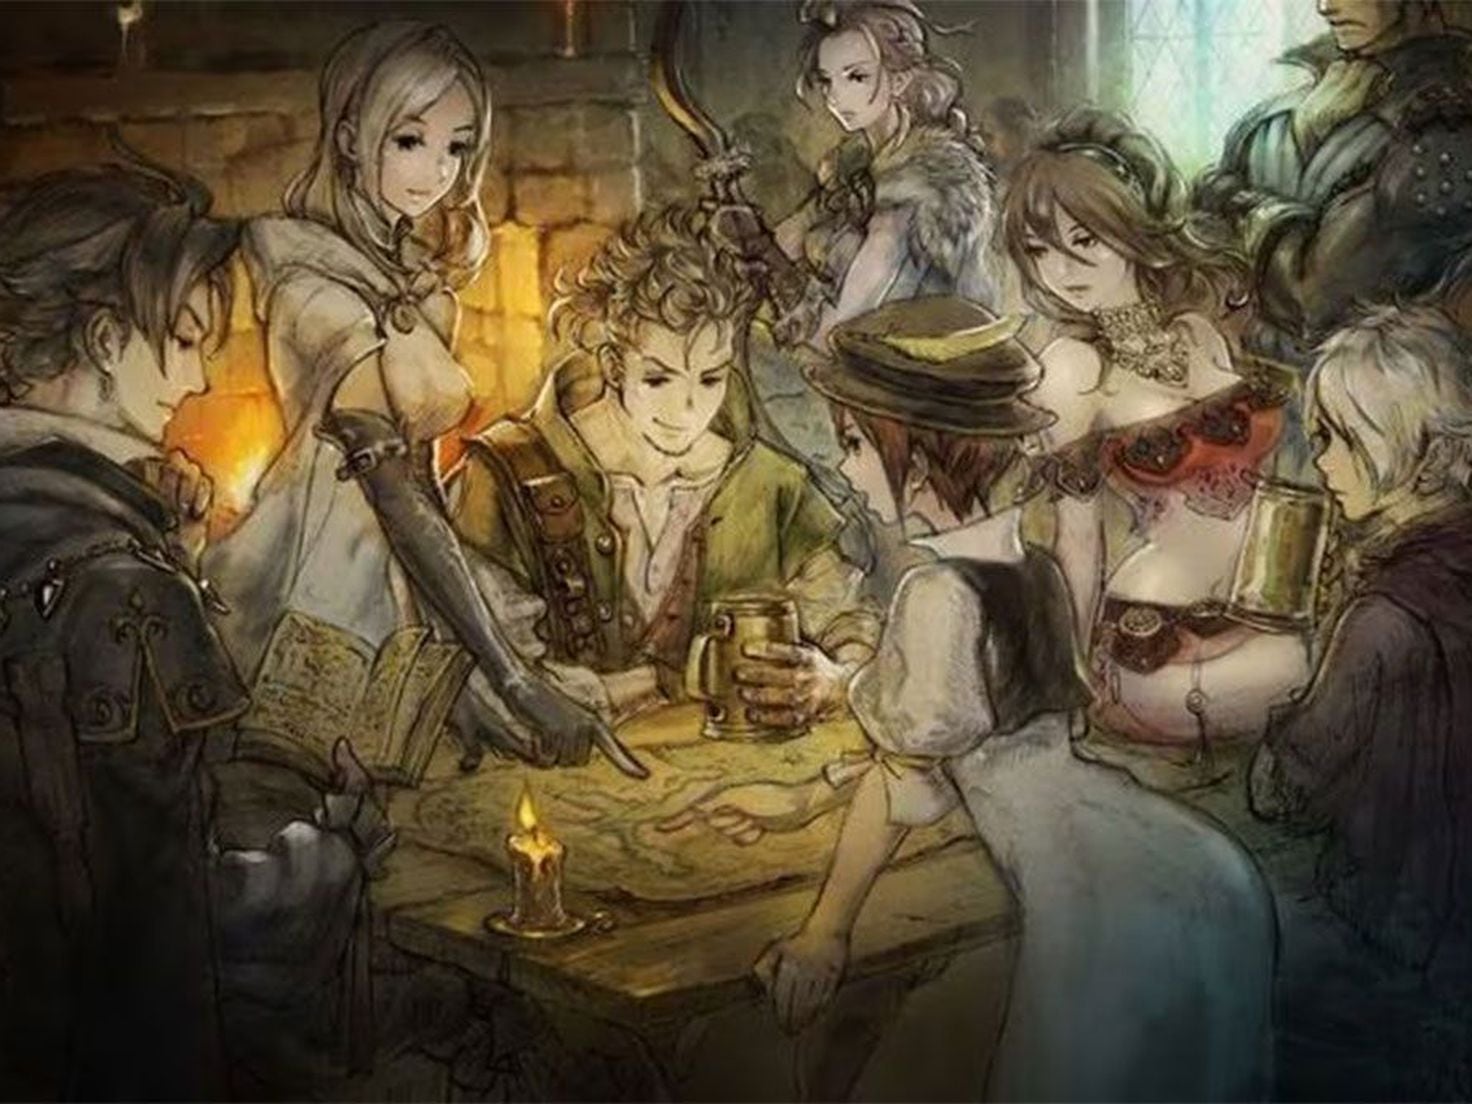 Octopath Traveler 2: Who is the best character to start with? - Meristation